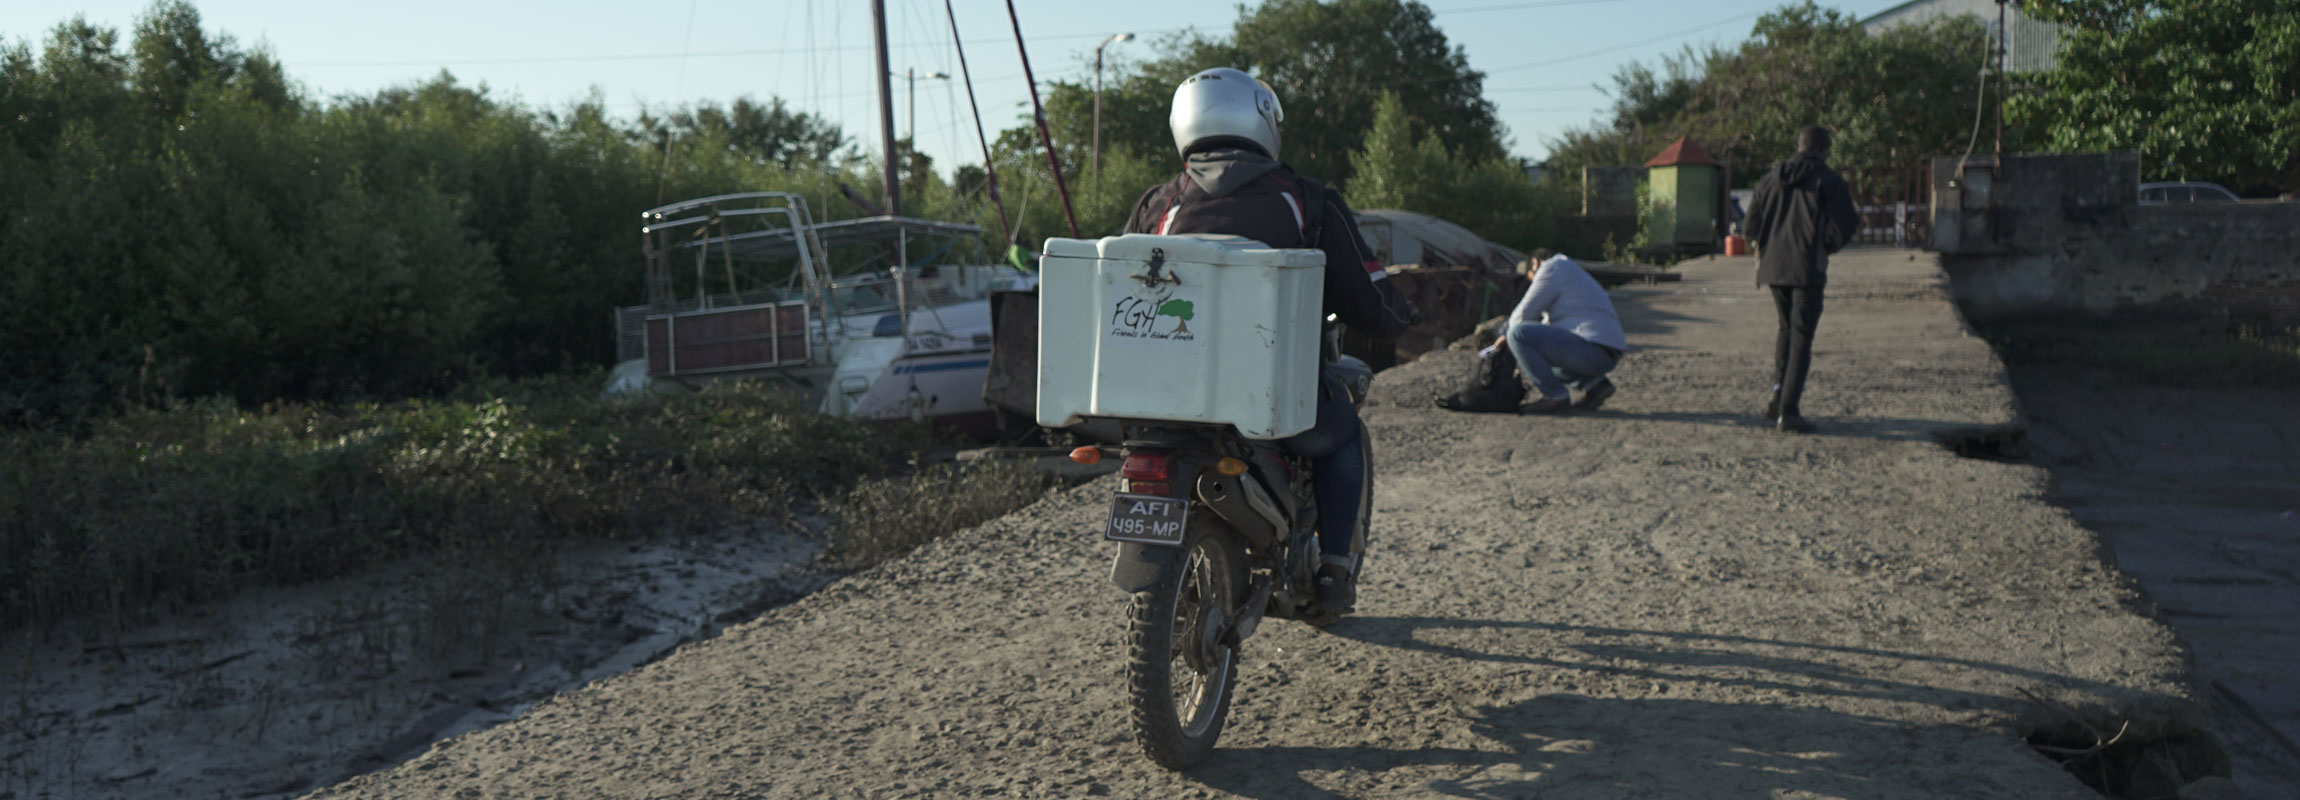 clinical medication delivery on motorcycle